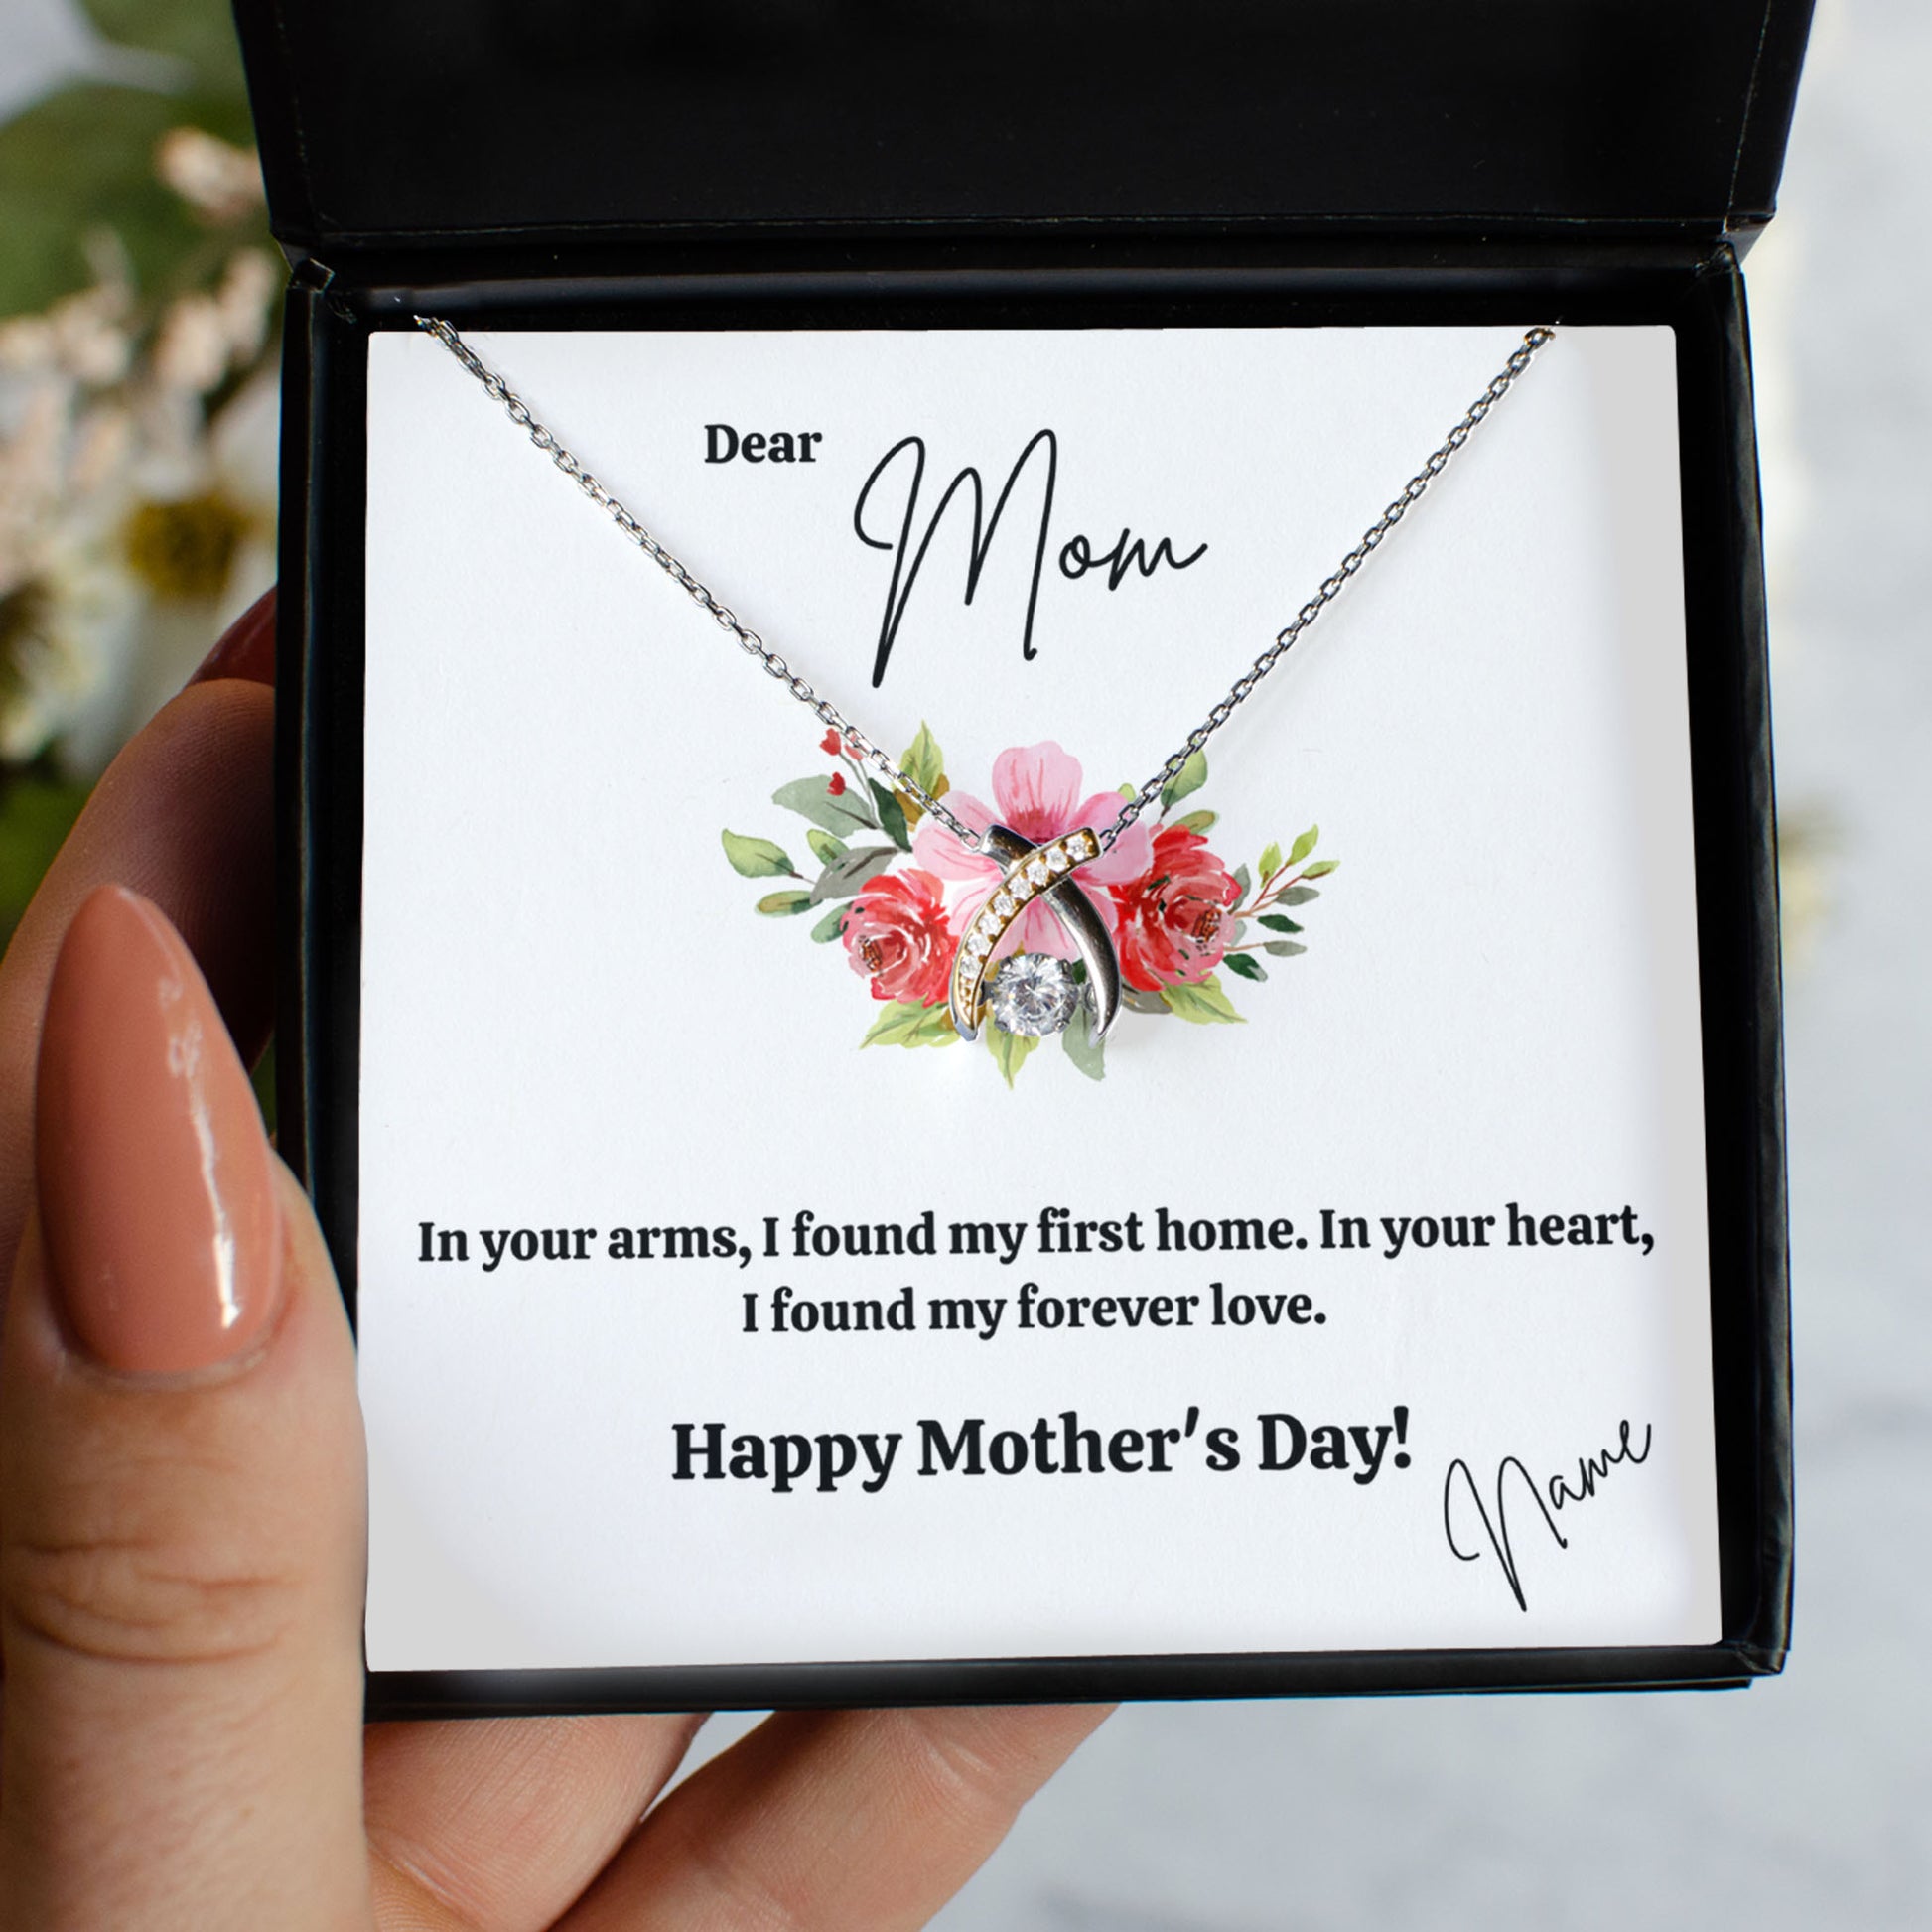 Personalized Necklaces + Message Cards - Silver Zirconia Wishbone Necklace -Personalized Mom Card 